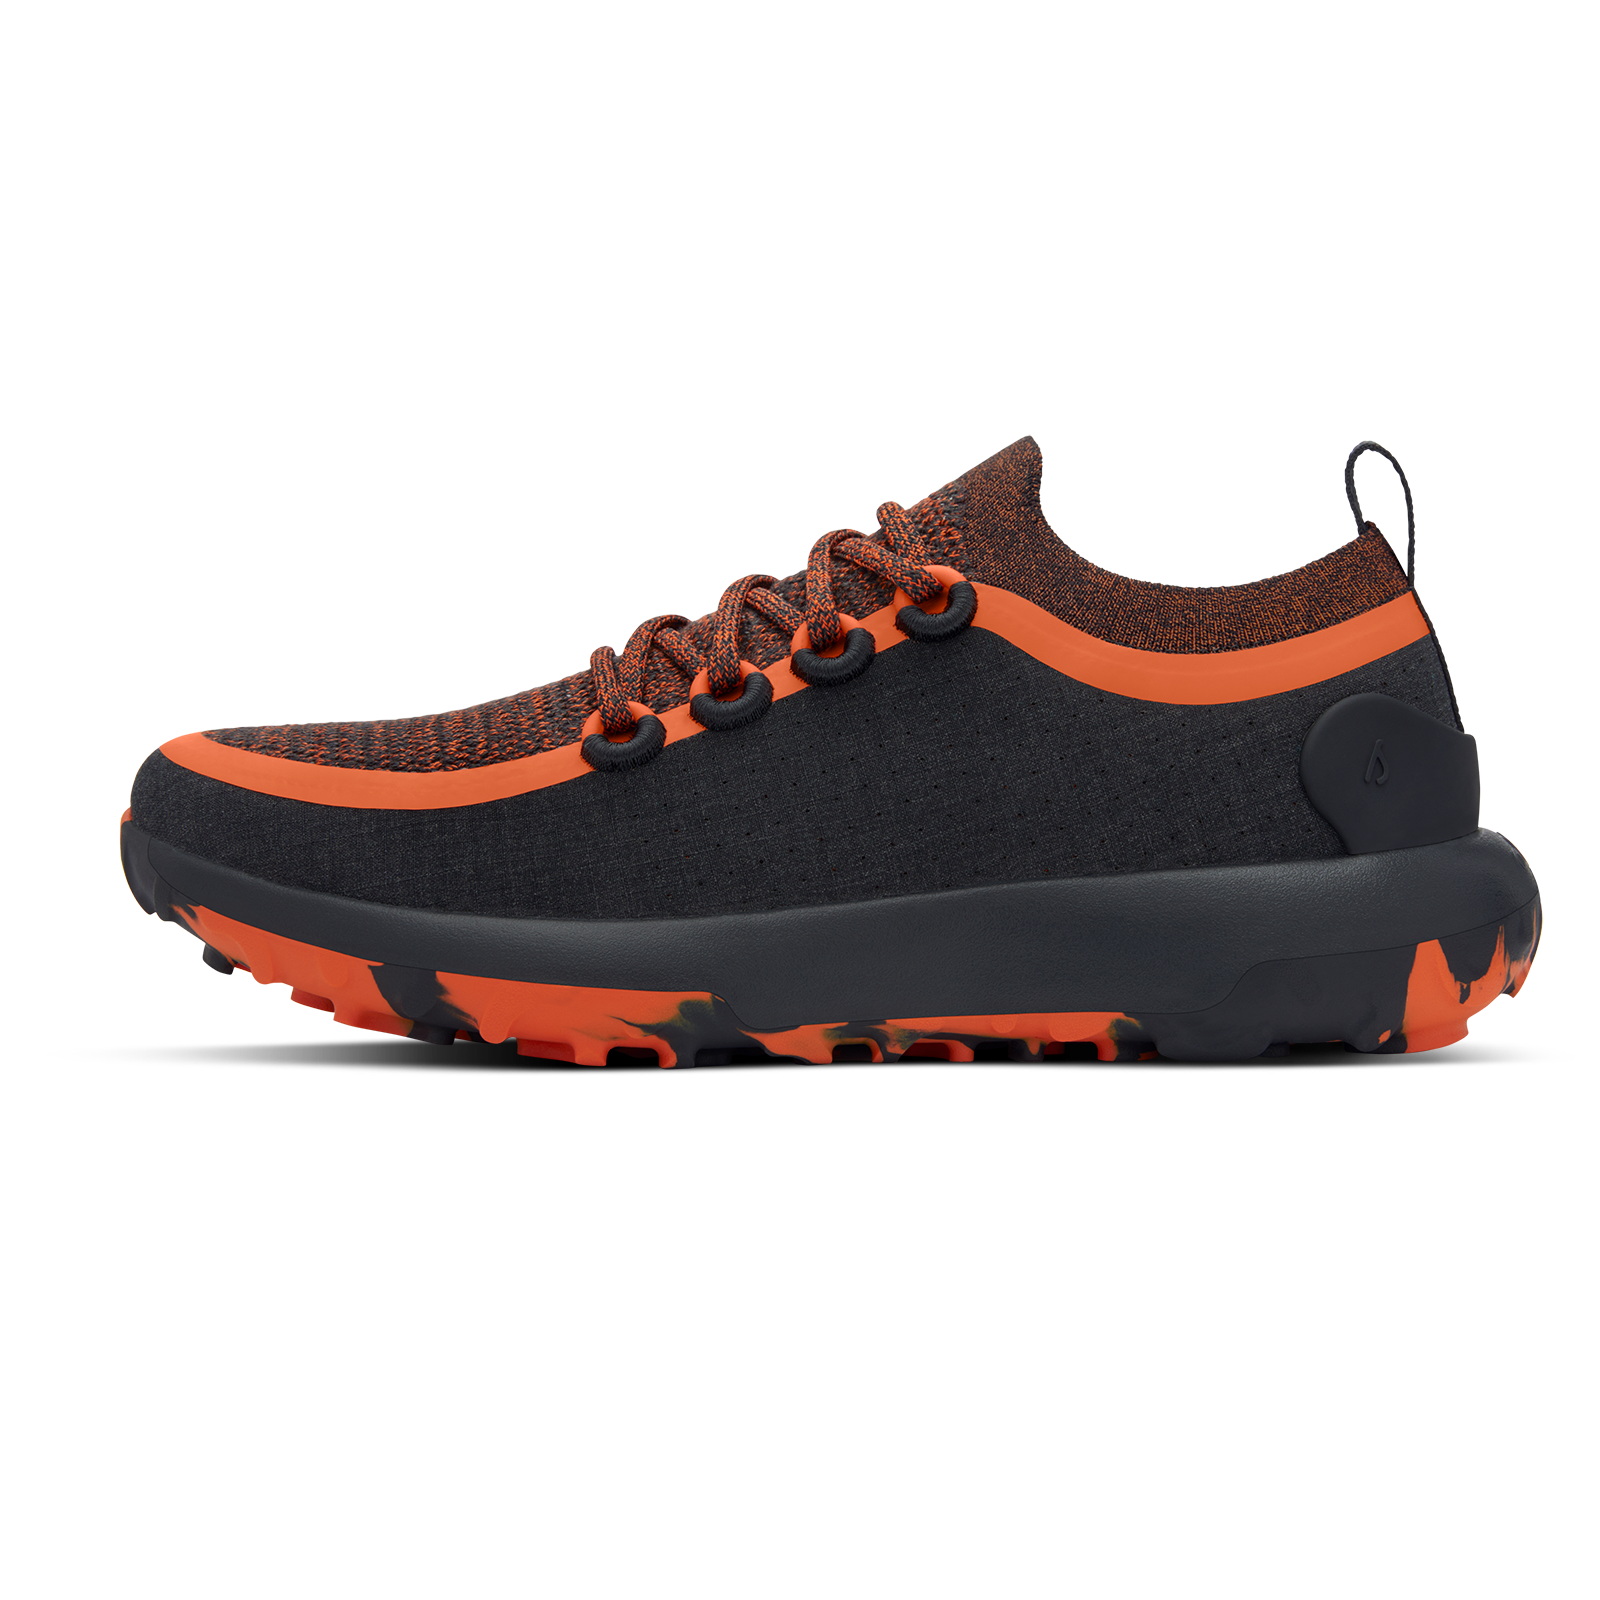 Women's Trail Runners SWT - Natural Black (Buoyant Orange Sole)